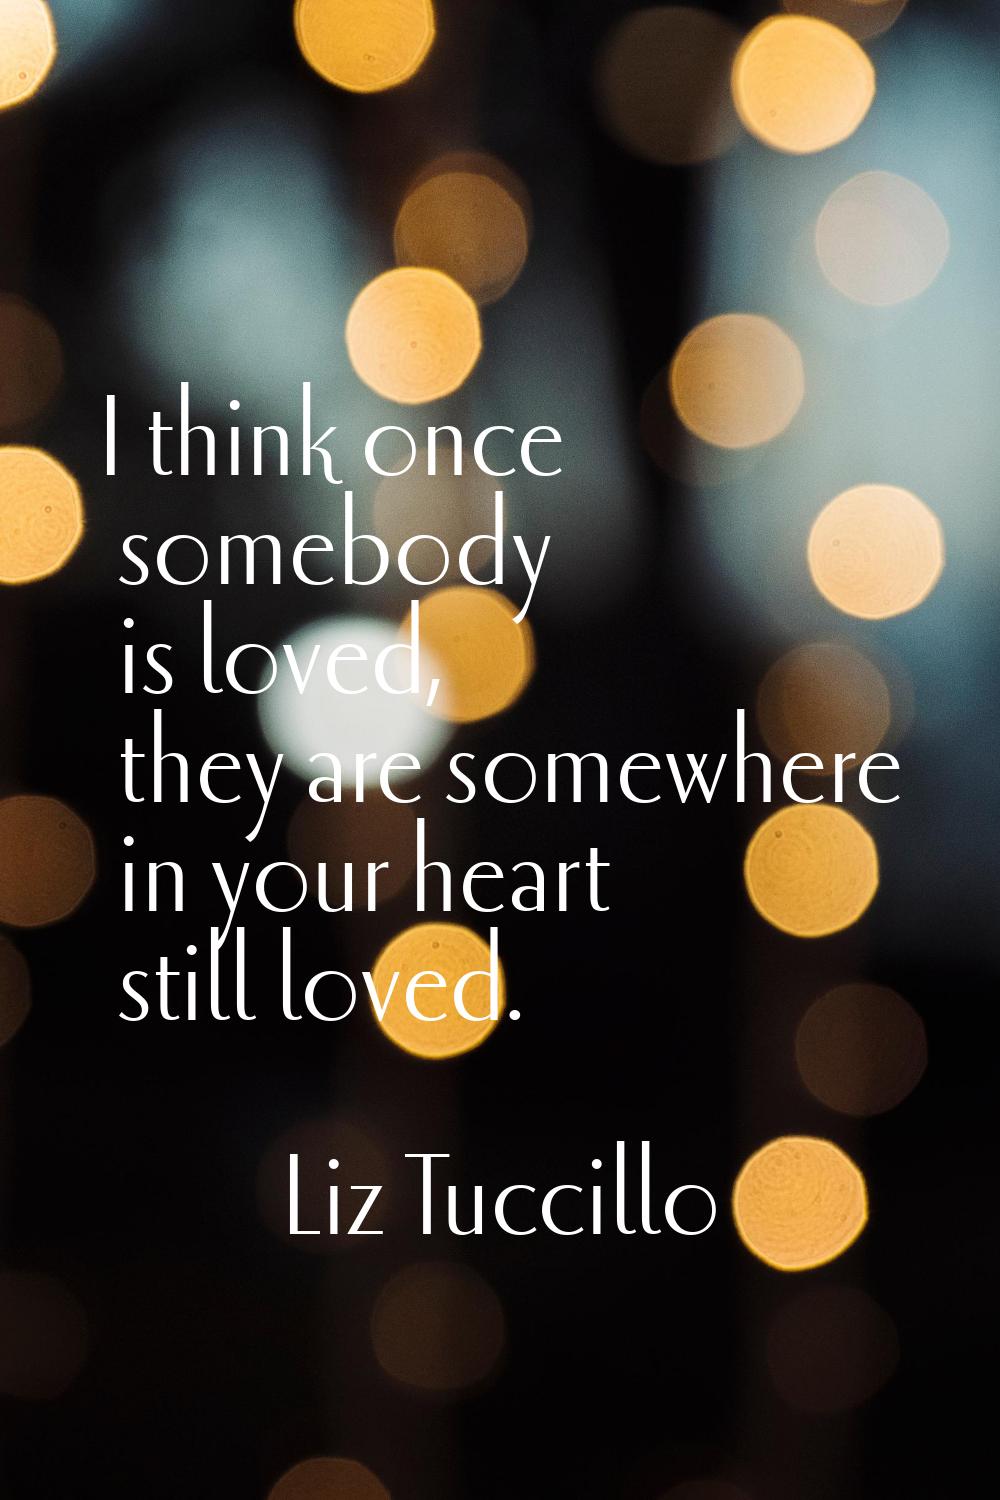 I think once somebody is loved, they are somewhere in your heart still loved.